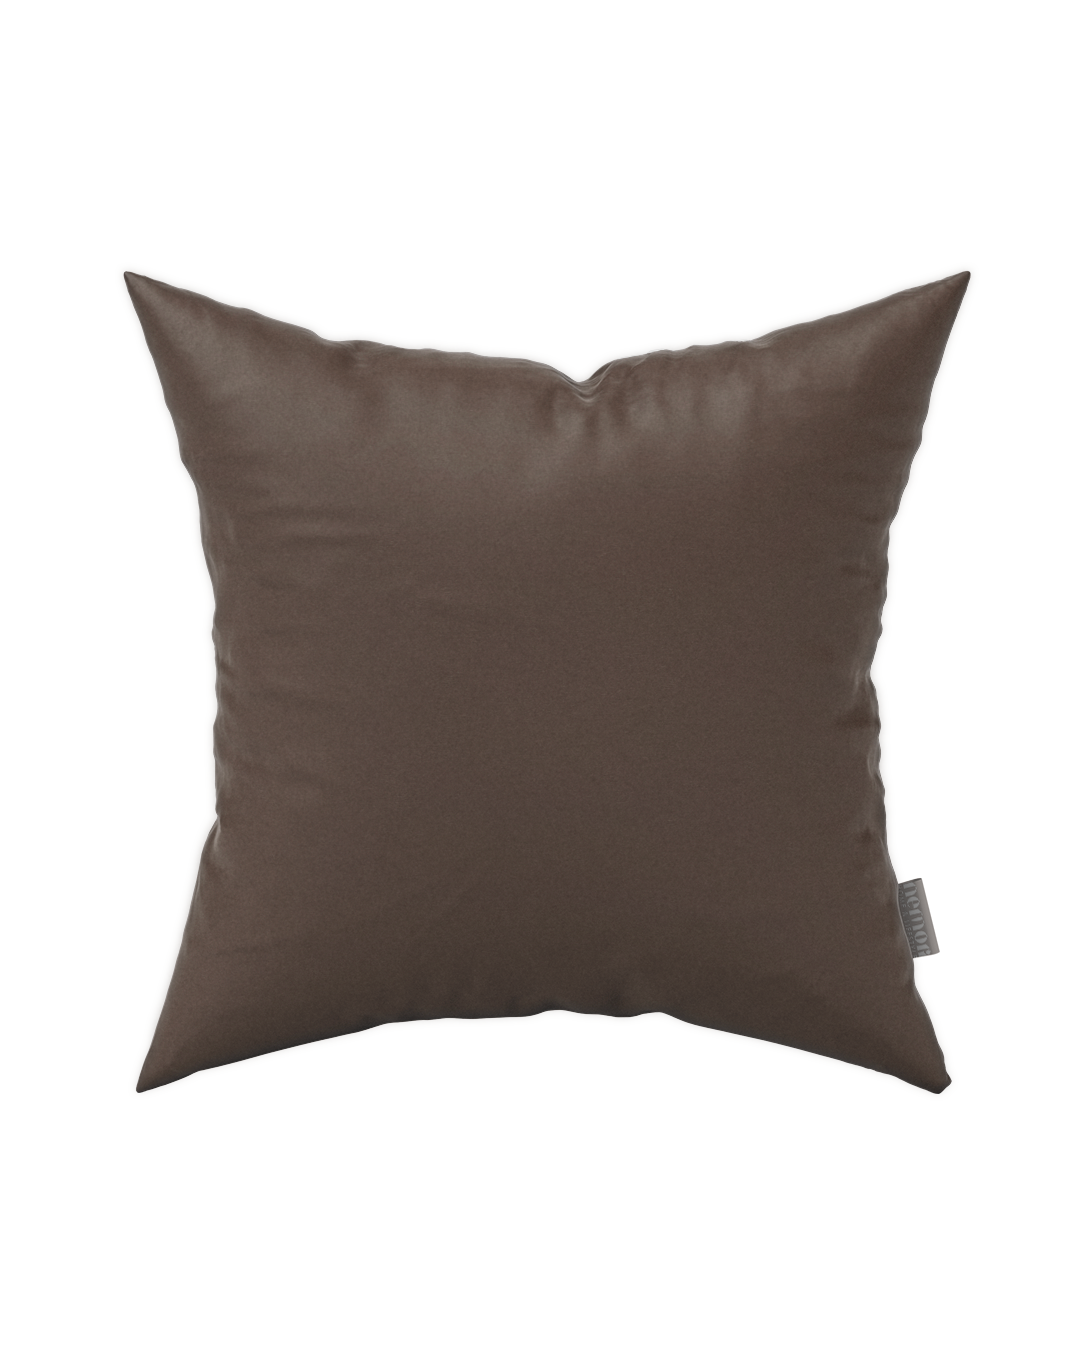 Alpin 01 Beige Pillow Cover